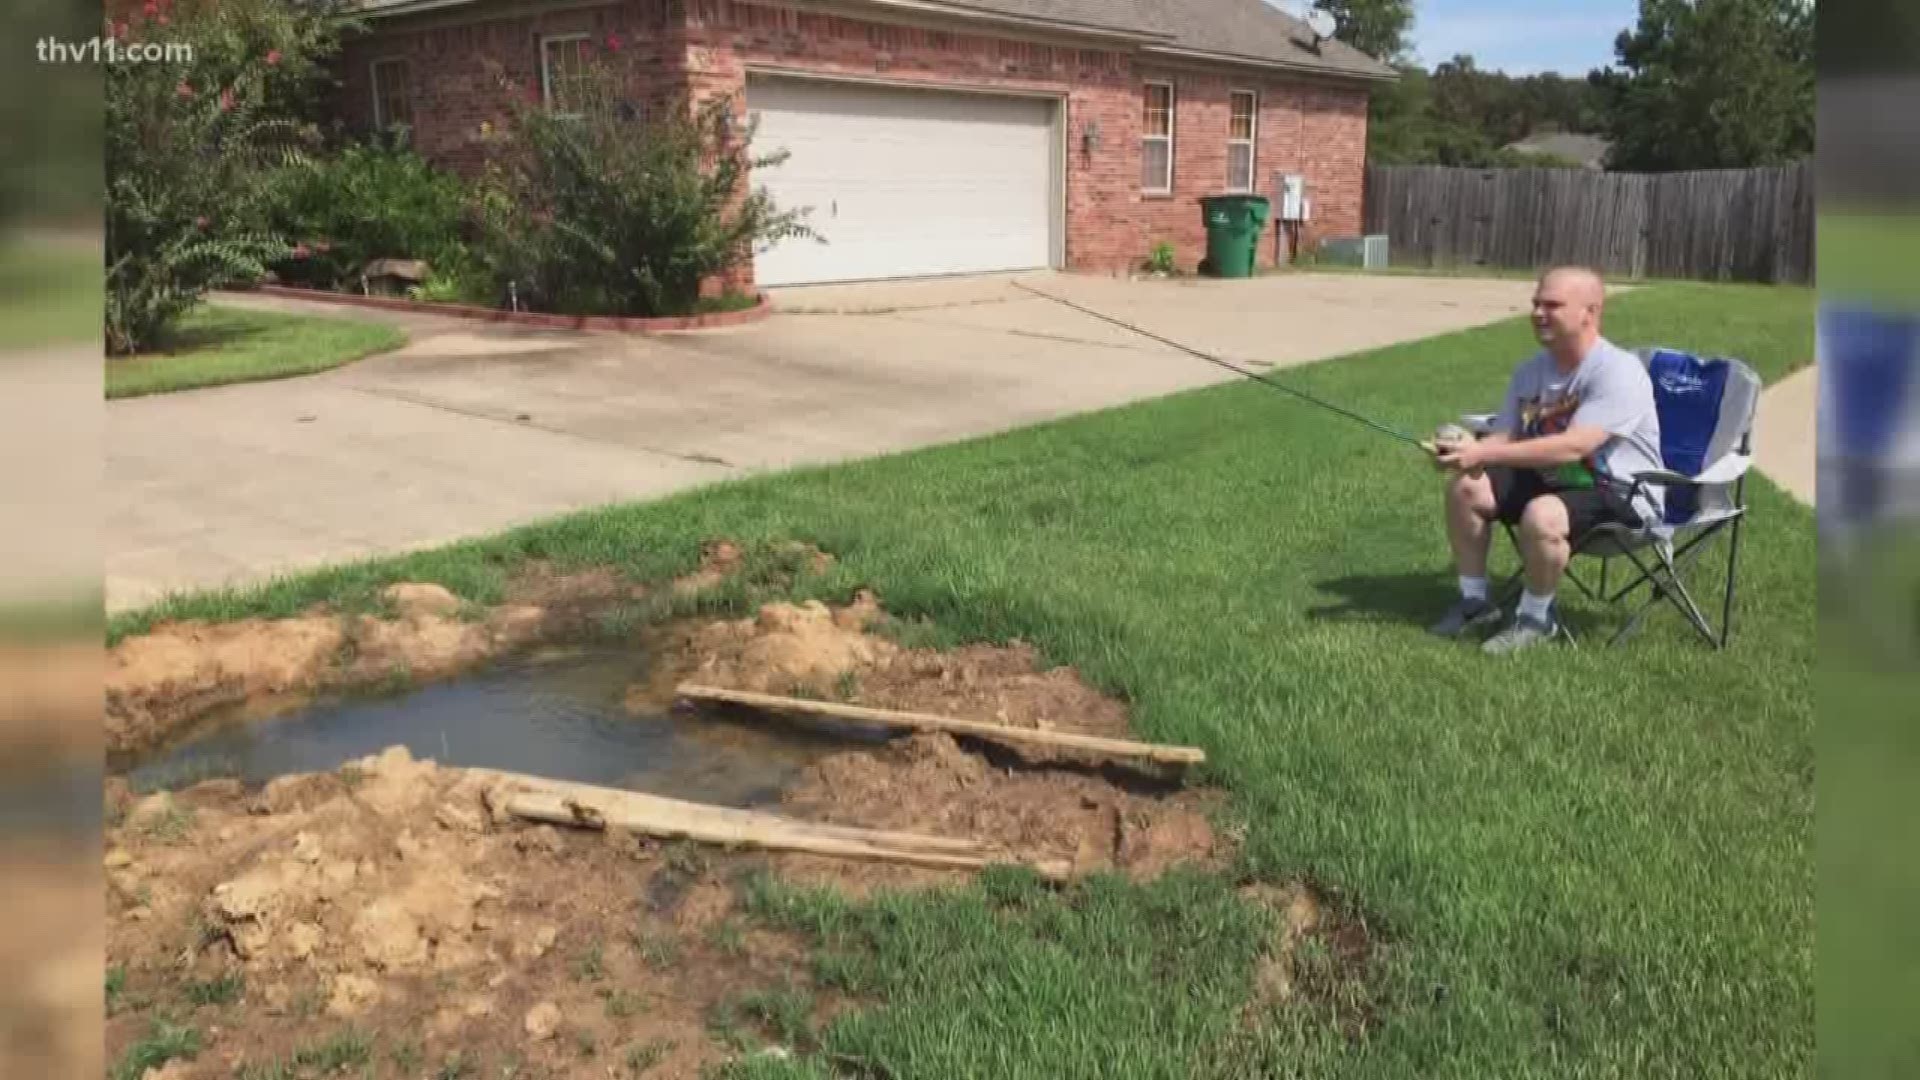 A Cabot man is fed up with a big hole that was dug into his yard several weeks ago. To make light of the situation, he turned to Facebook with photoshopped pictures.